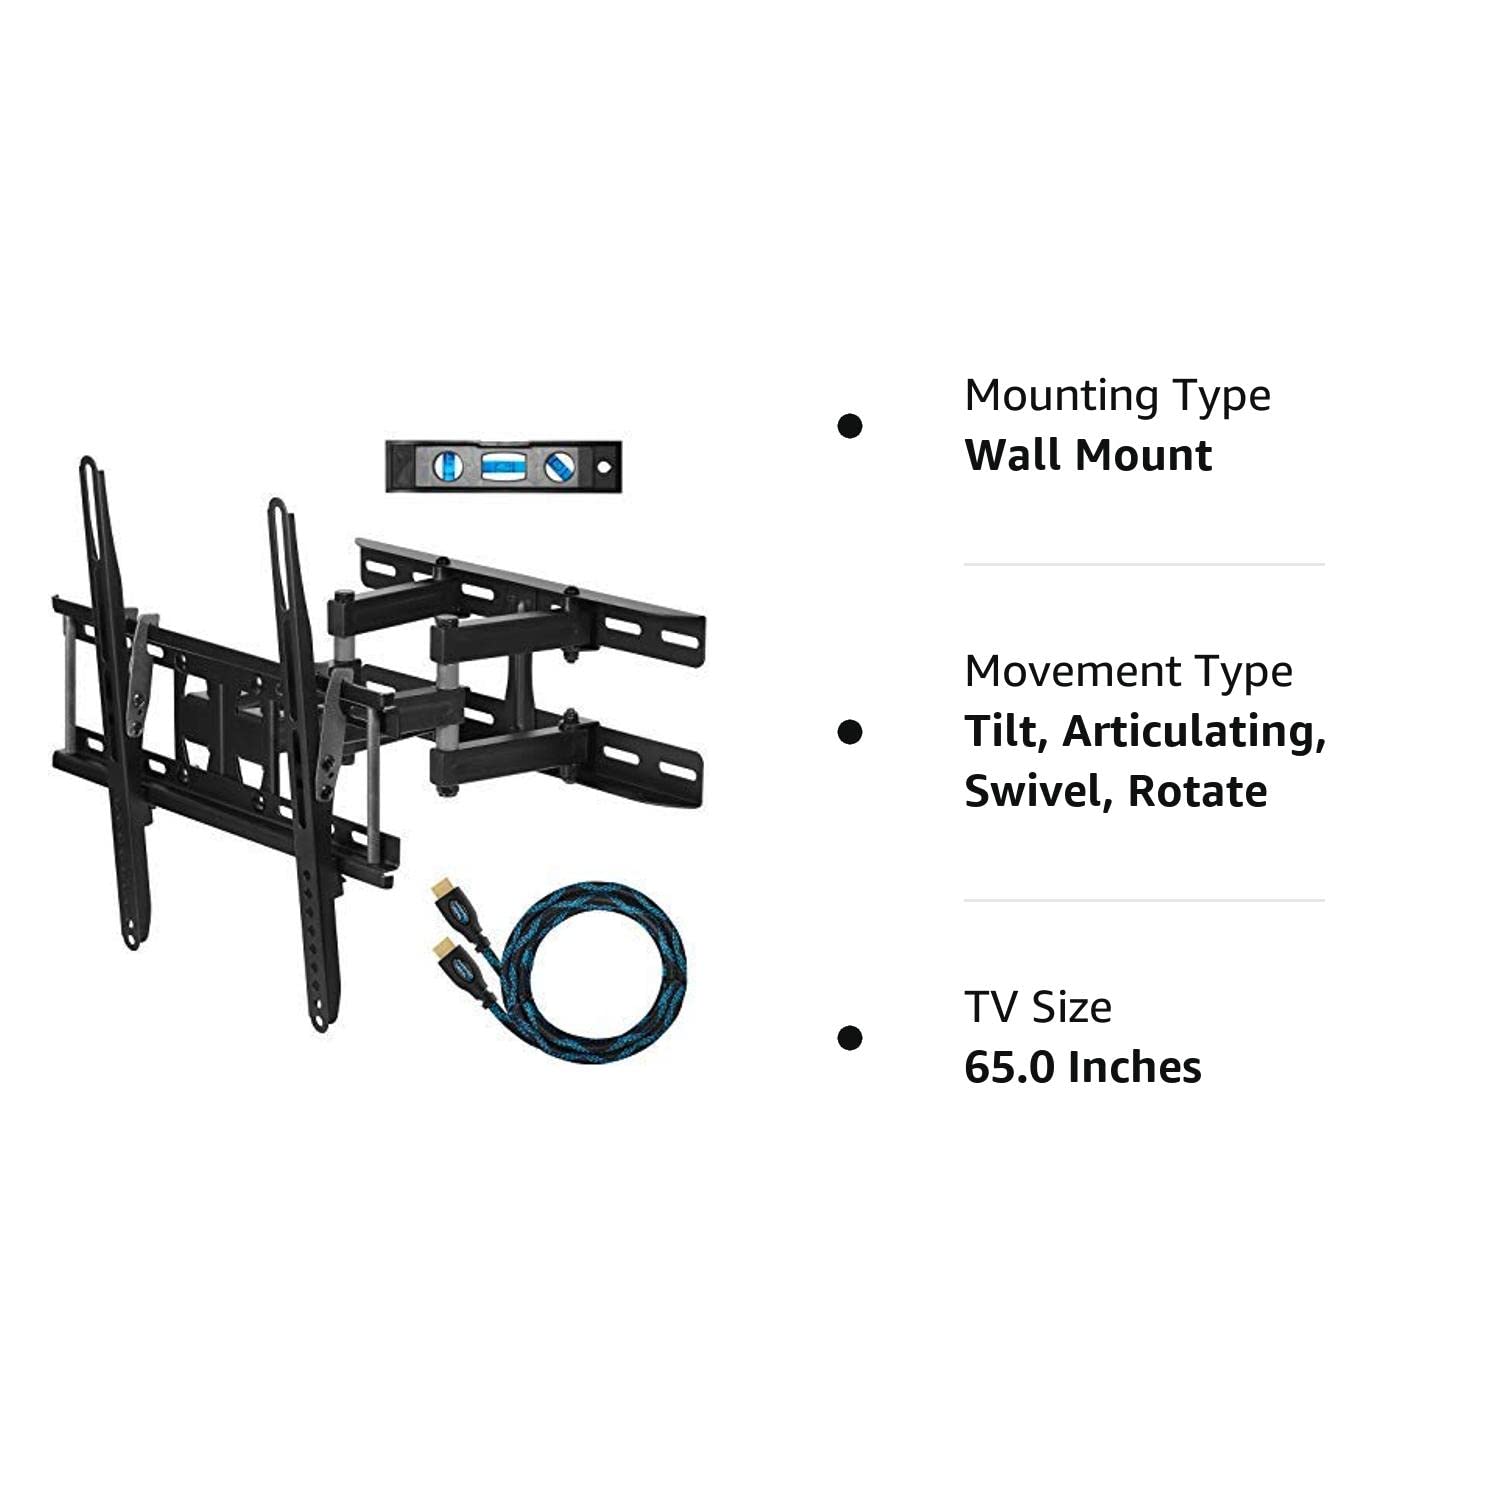 Cheetah Mounts APDAM3B Dual Articulating Arm TV Wall Mount Bracket for 20-65” TVs up to VESA 400 and 115lbs,Mounts on Studs up to 16”, Includes Twisted Veins 10’HDMI Cable and 6” 3-Axis Bubble Level